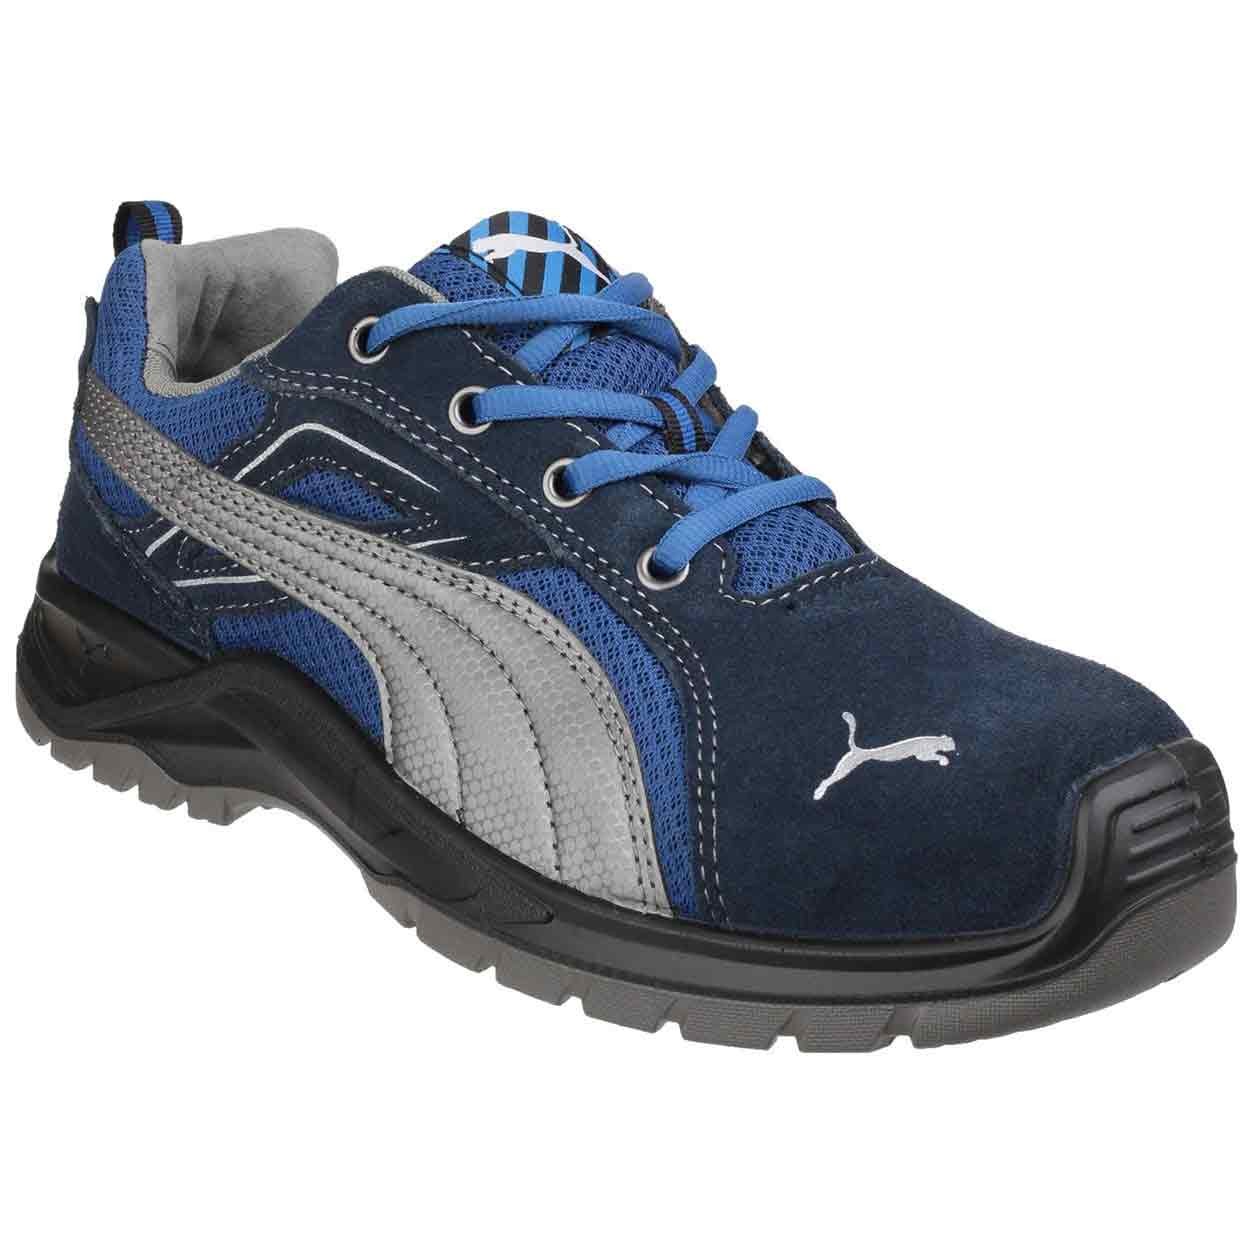 Puma Safety Omni Sky Low - Safety Shoes and Trainers - Mens Safety Boots &  Shoes - Safety Footwear - Best Workwear